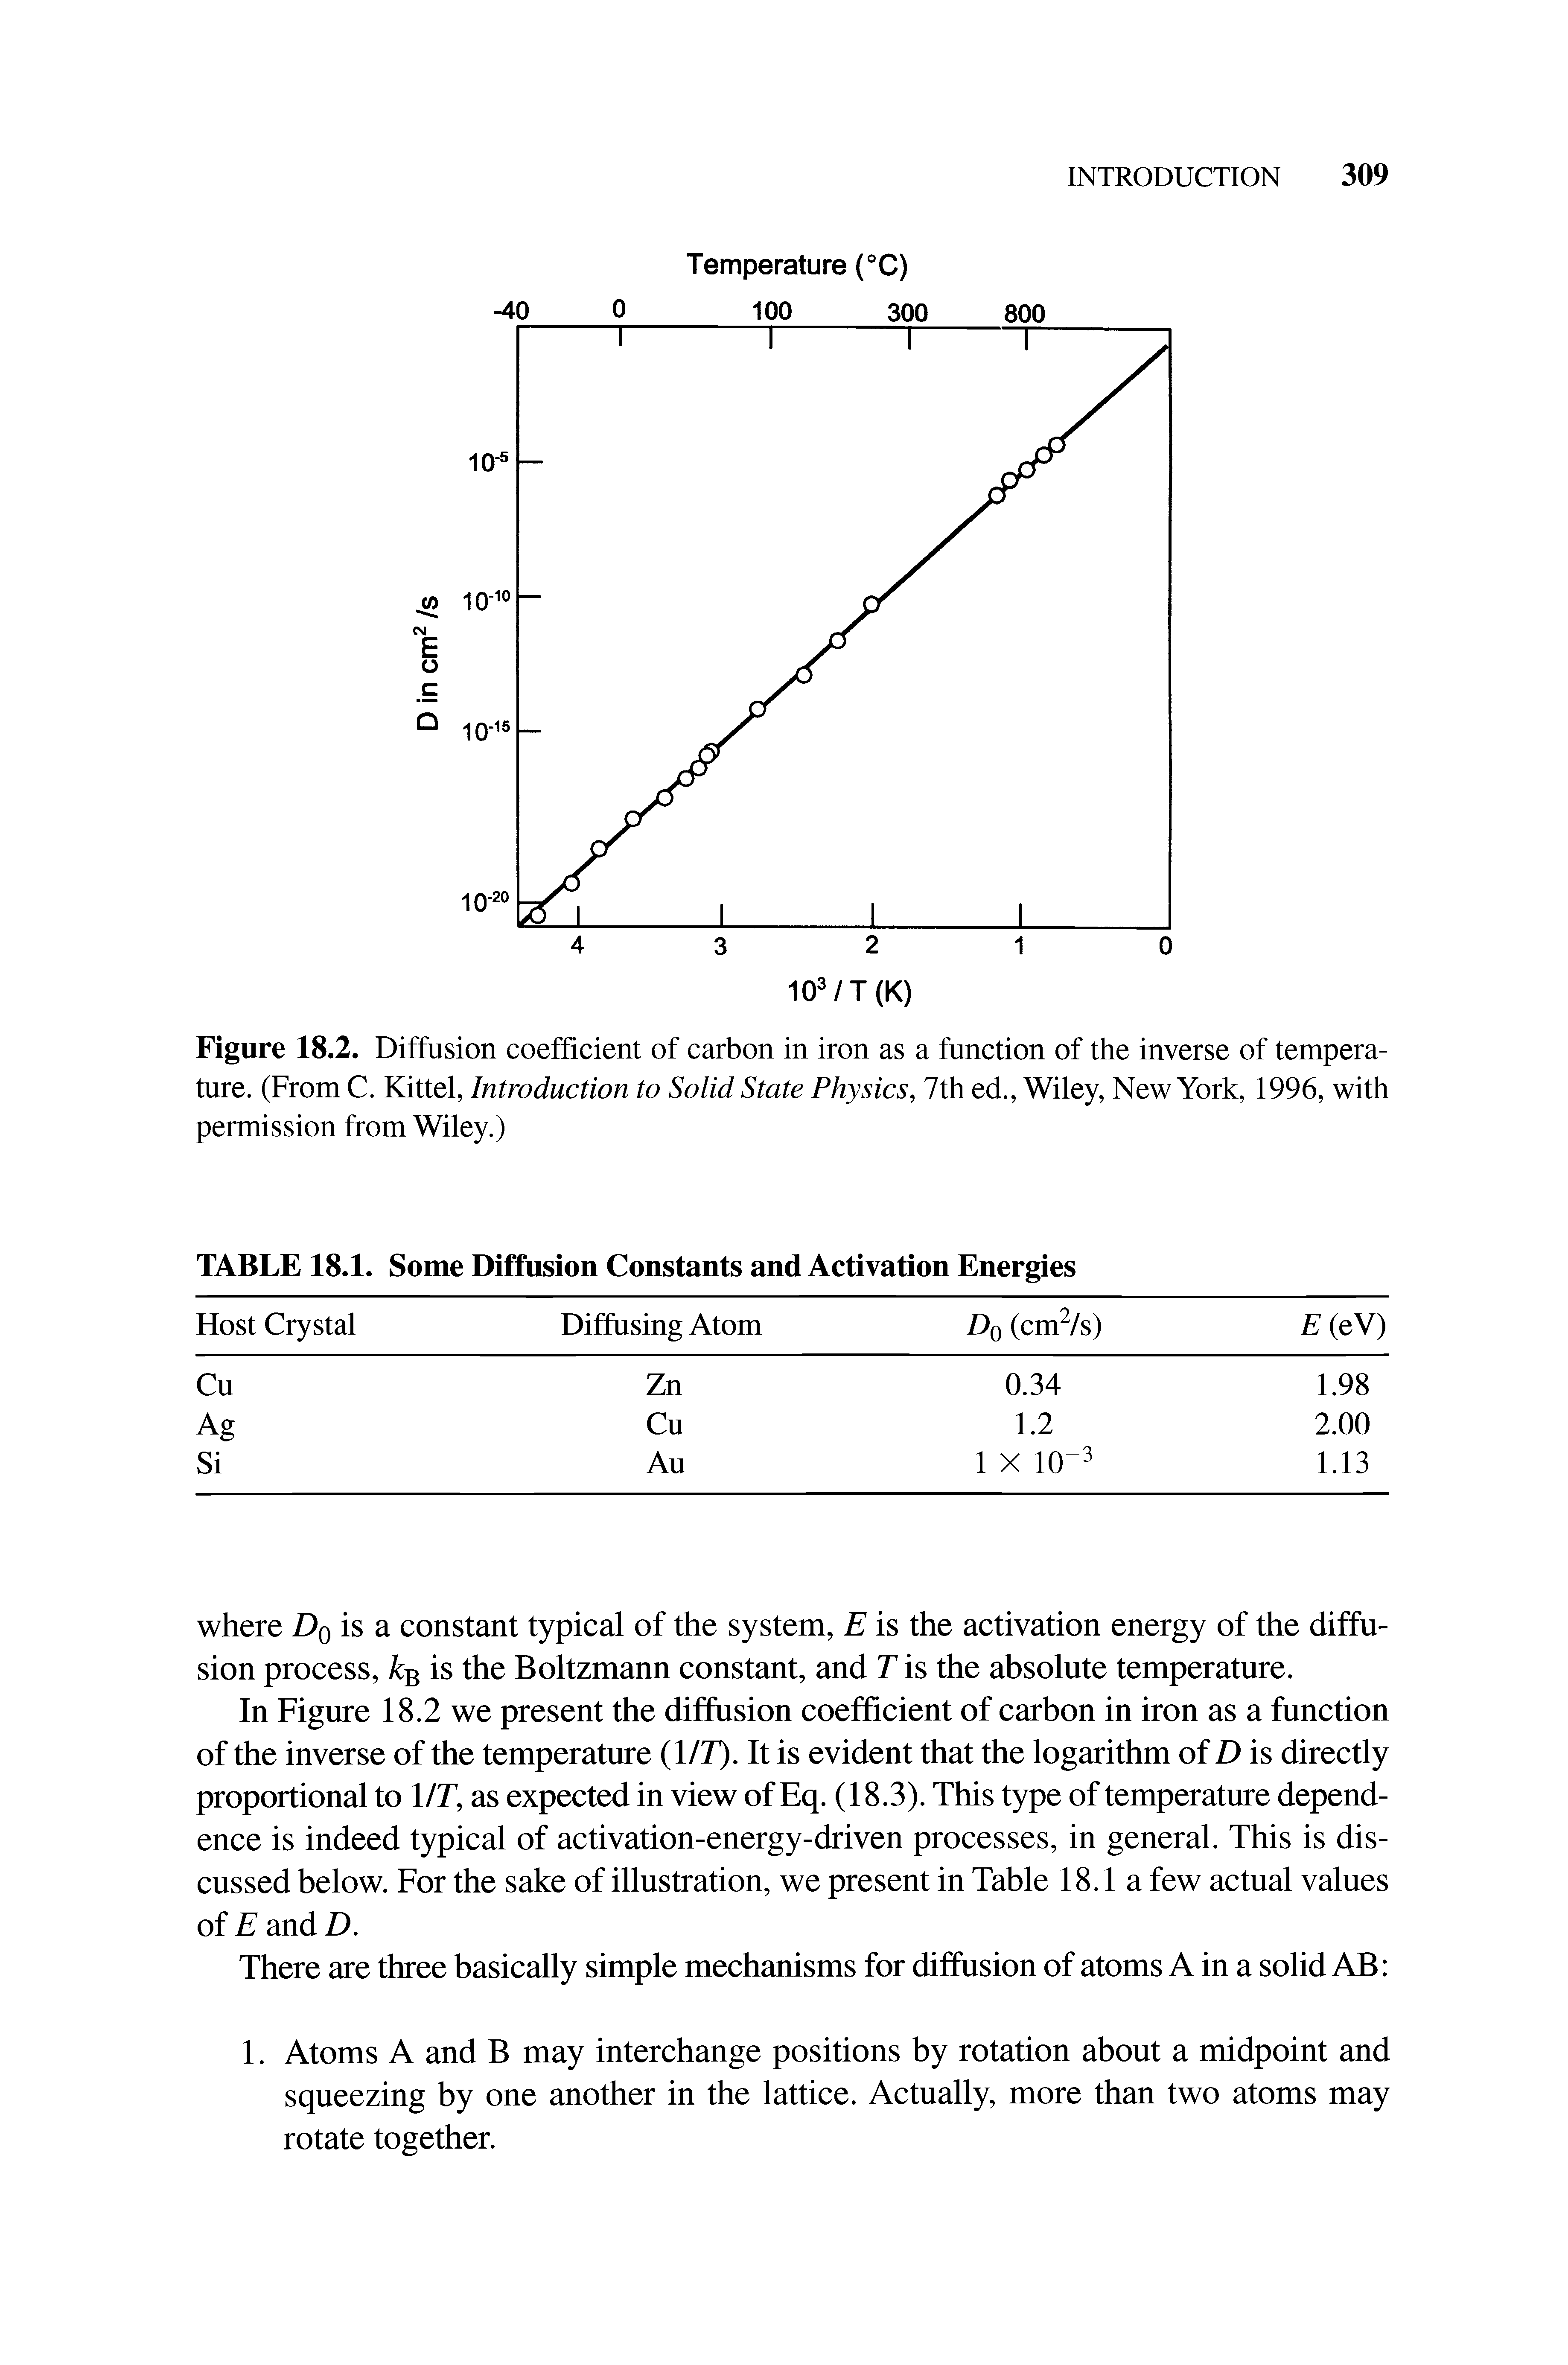 Figure 18.2. Diffusion coefficient of carbon in iron as a function of the inverse of temperature. (From C. Kittel, Introduction to Solid State Physics, 7th ed., Wiley, New York, 1996, with permission from Wiley.)...